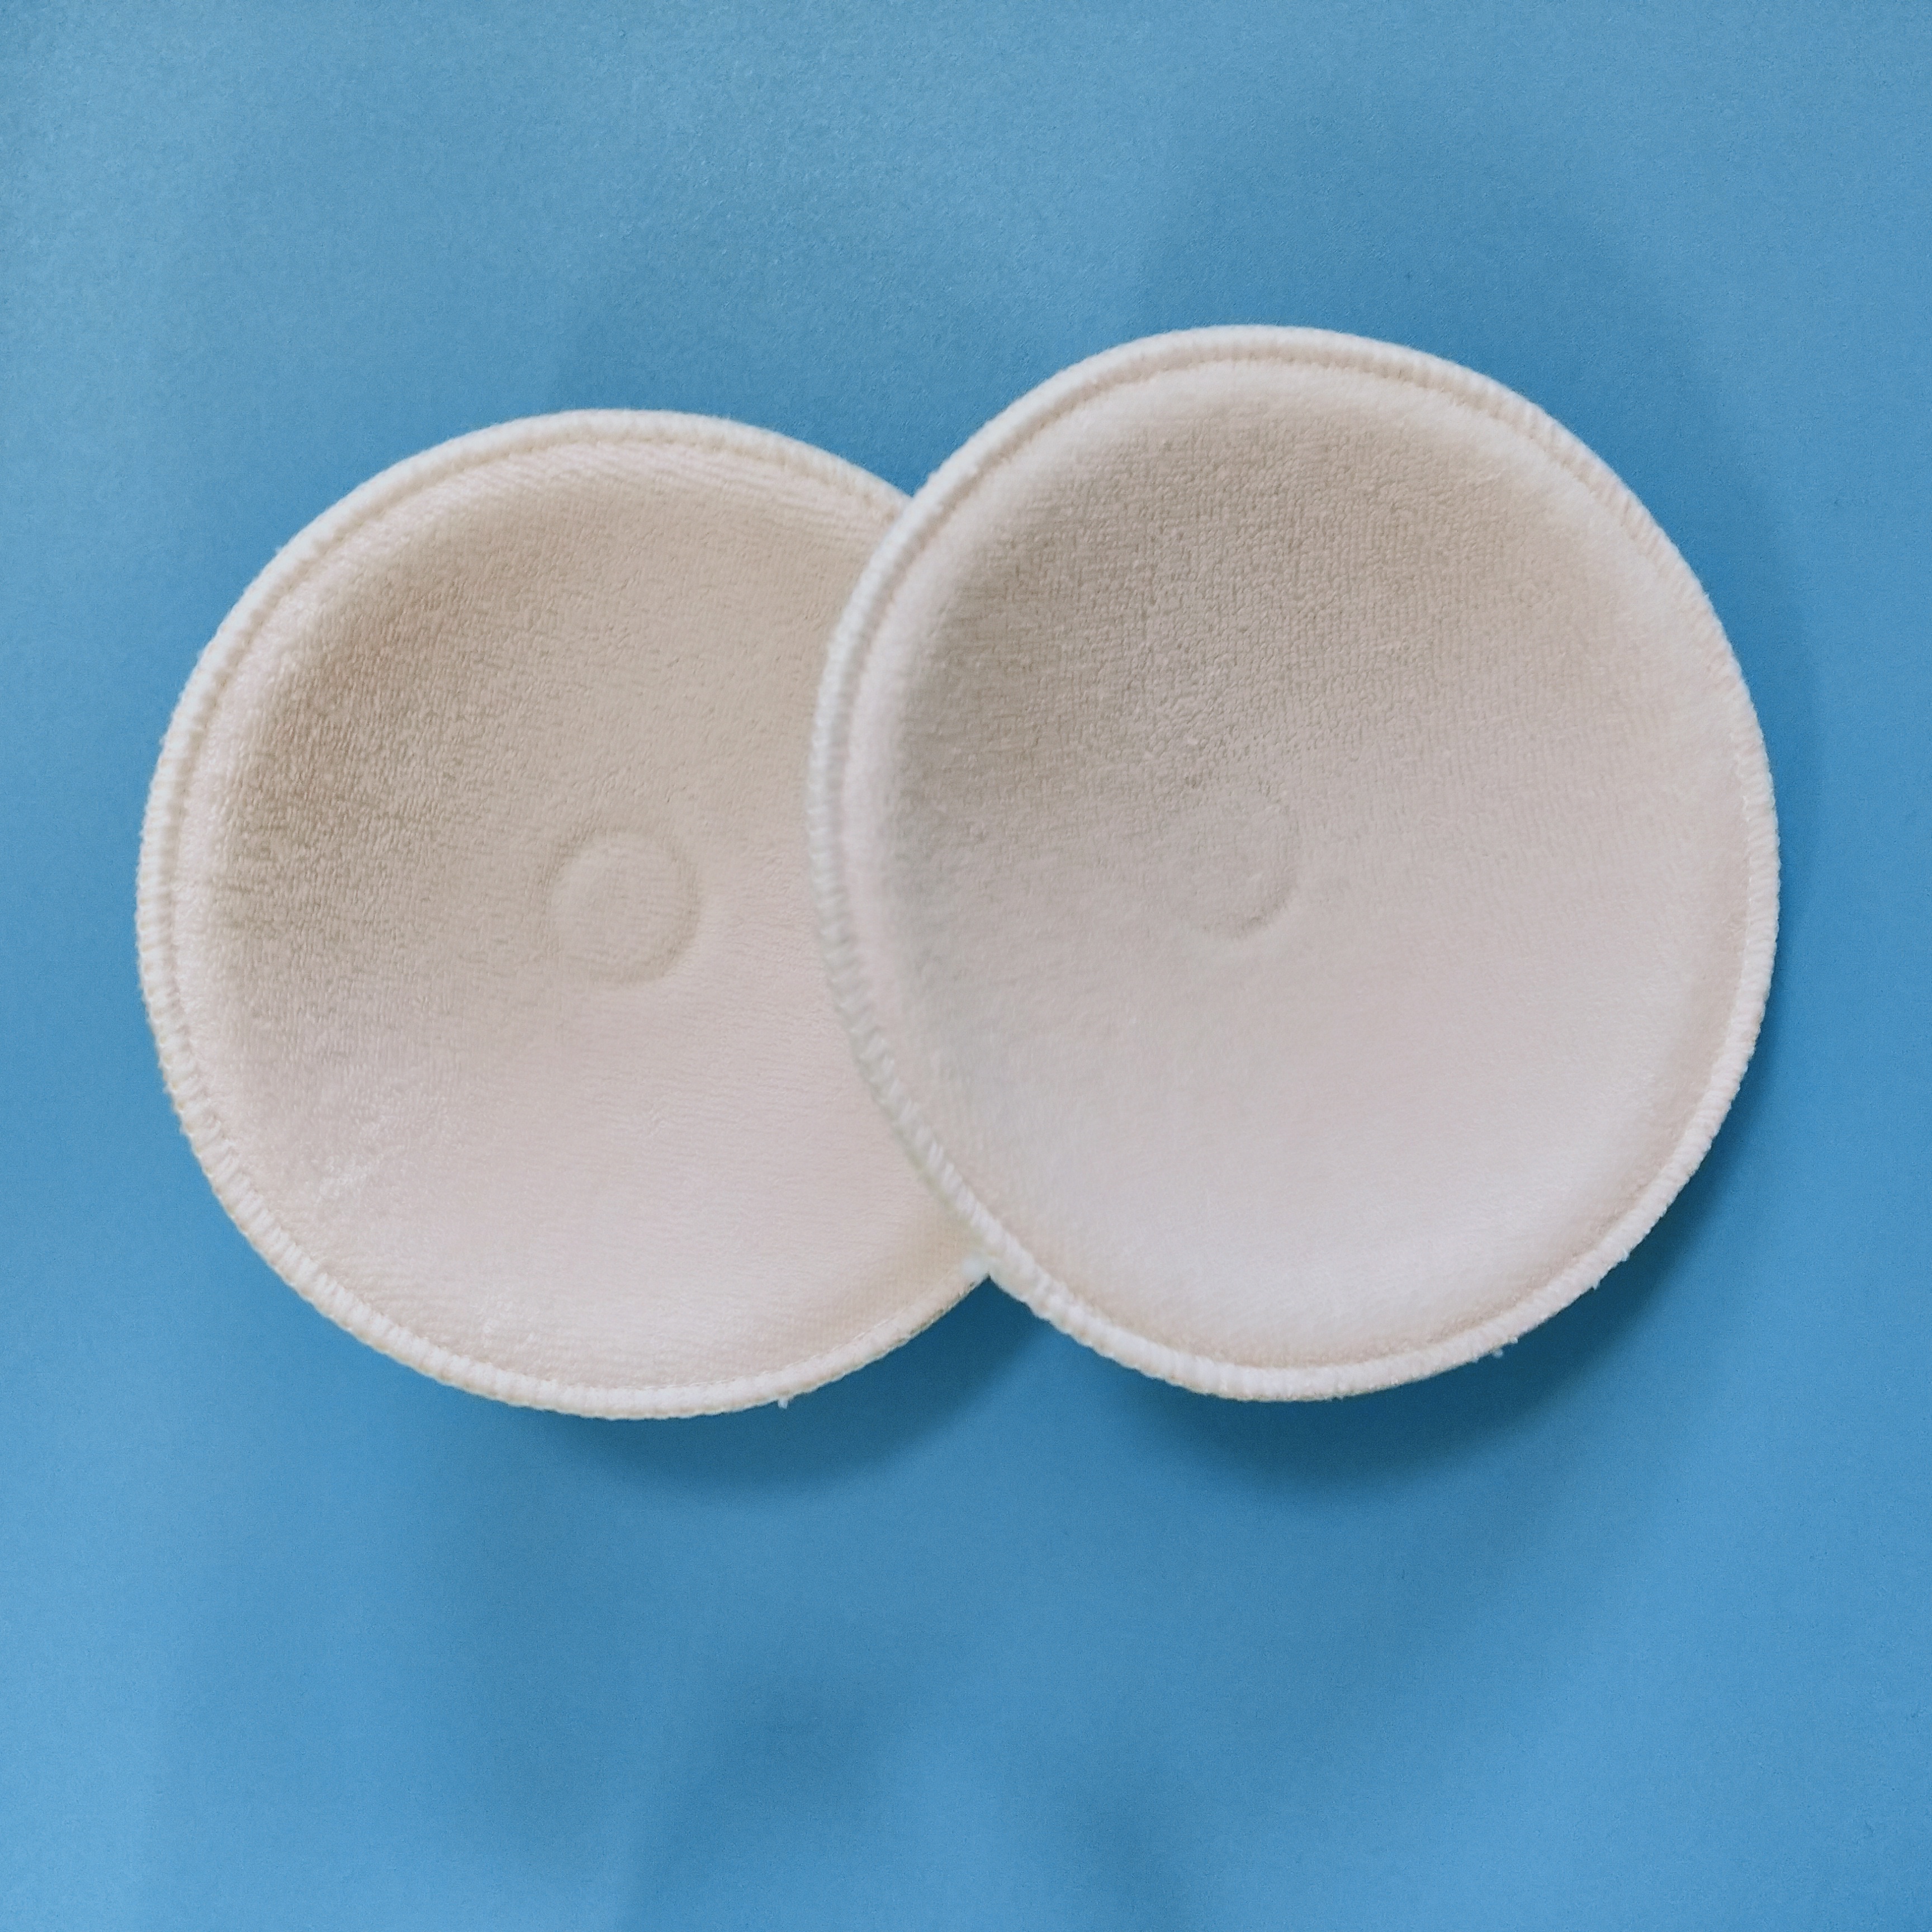 bamboo breast pads